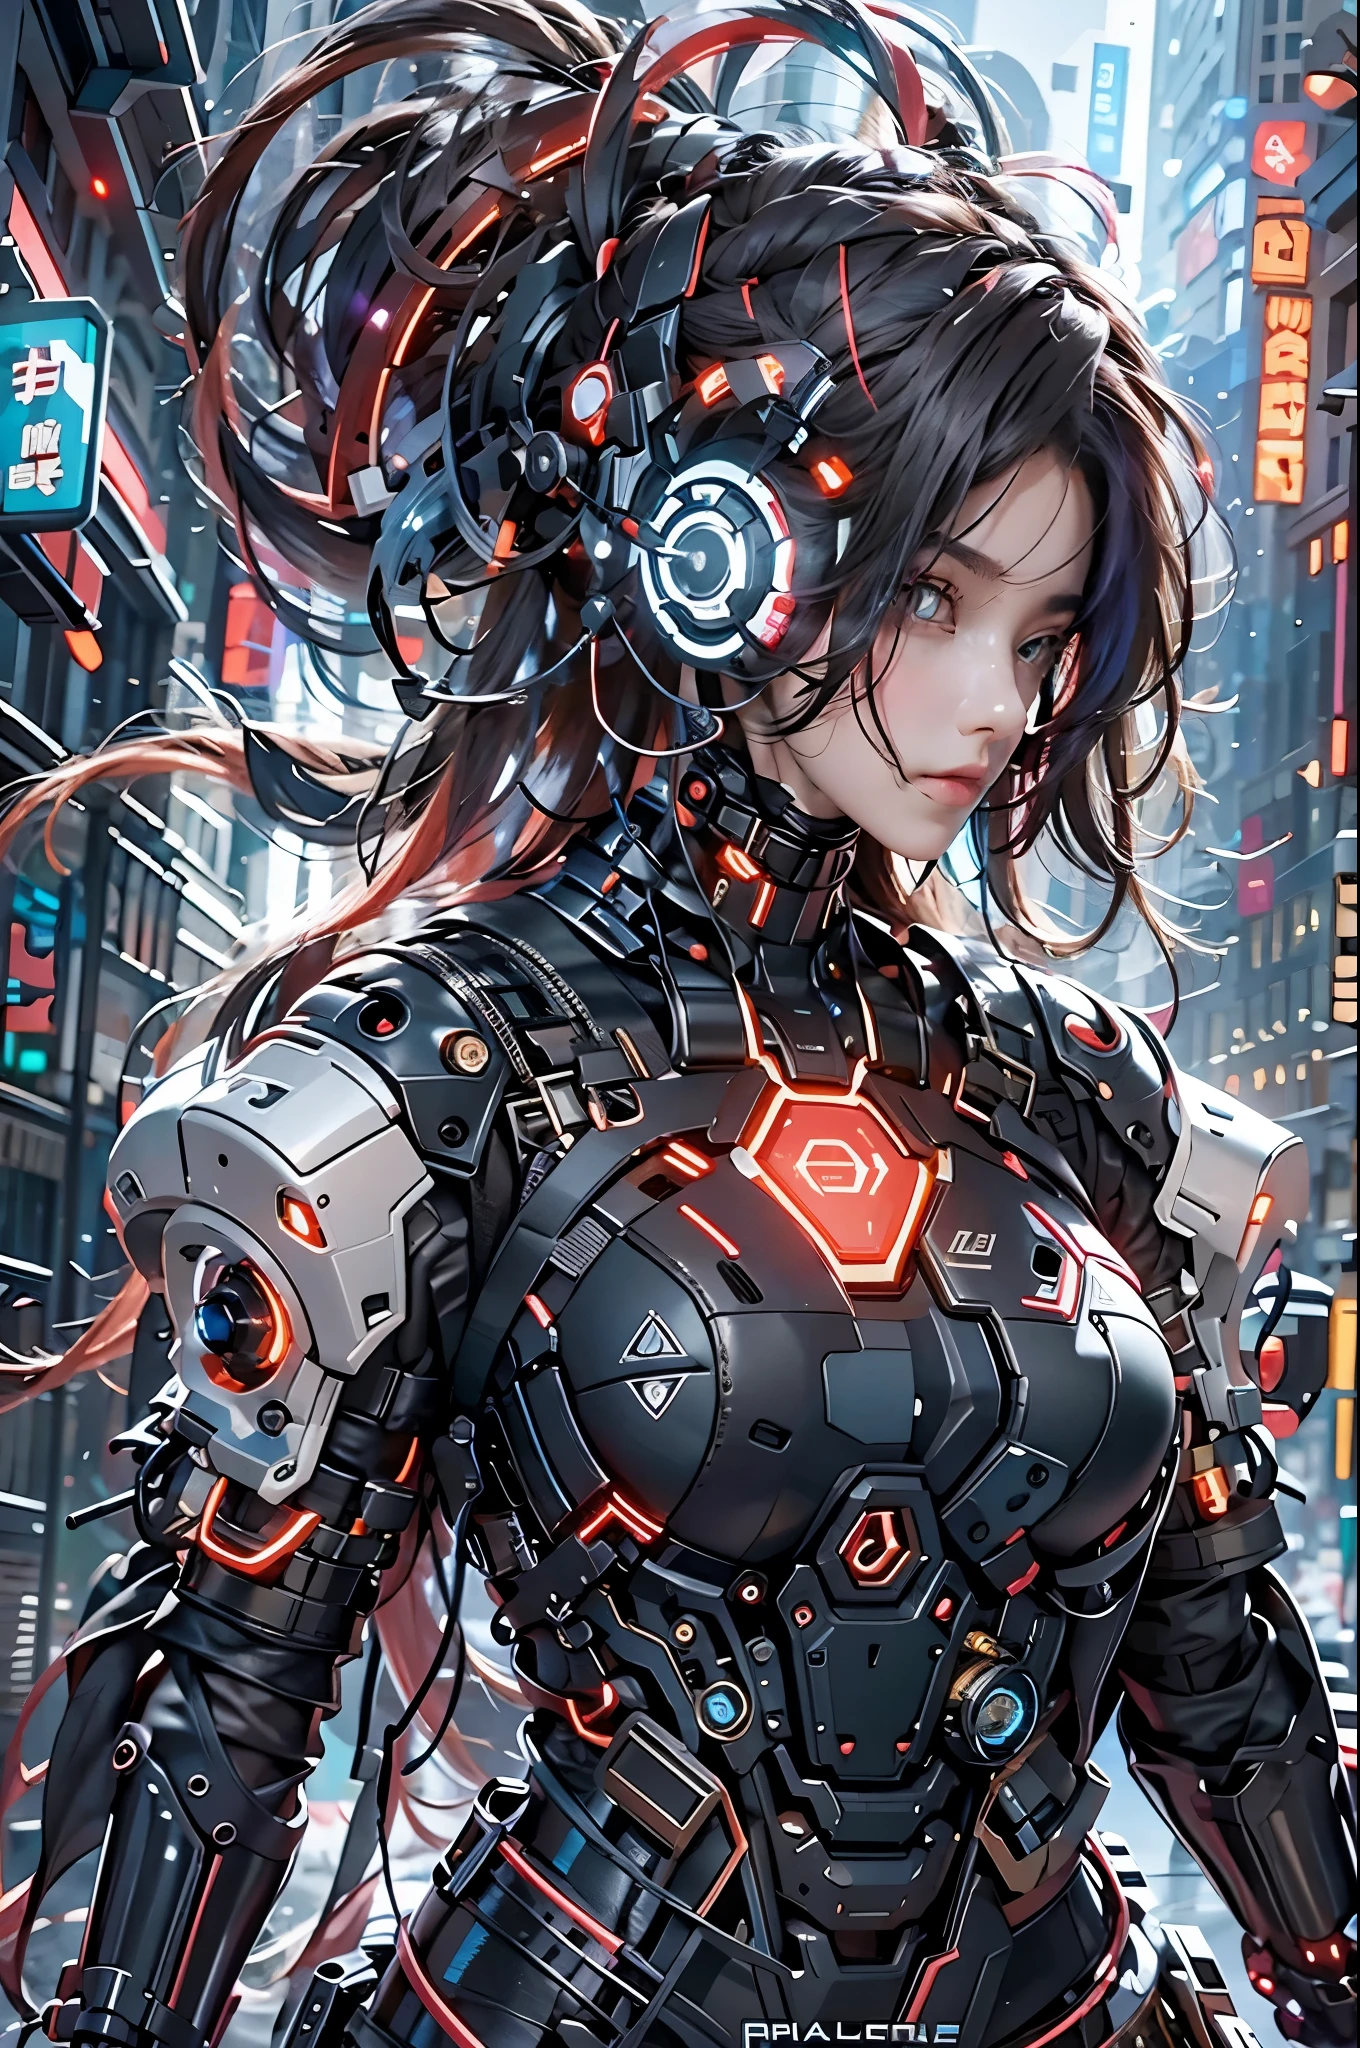 best quality，masterpiece，16k，1girl,Cyberpunk,headset,Mechanical earphones,Luminous earphones,Fragmented mechanical jewelry,Technological background,Positive close-up,Robot arm,The mechanical structure of the earpiece resembling a handgun,Slightly exposed chest,Multi light source earphones,Earphones with super complex mechanical structures,Multi light source neck protection,Emit red light,Strange shaped mechanical earphones,Super complex mechanical earphones,Black mechanical armor,Full body multiple light source points,Urban background,Multi light source background,skyscraper,night